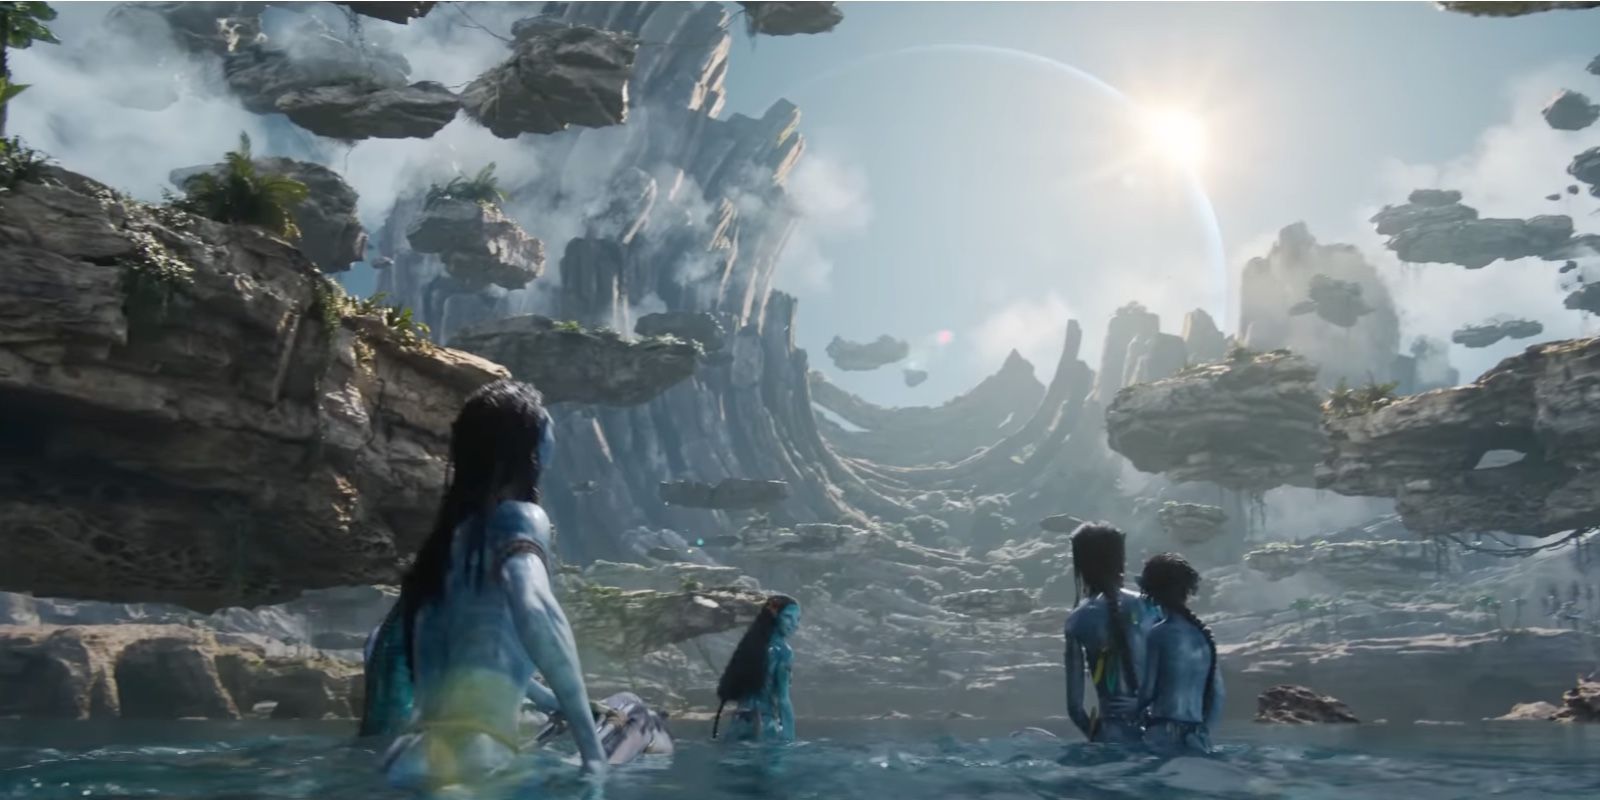 Avatar 2 The Way of the Water teaser trailer